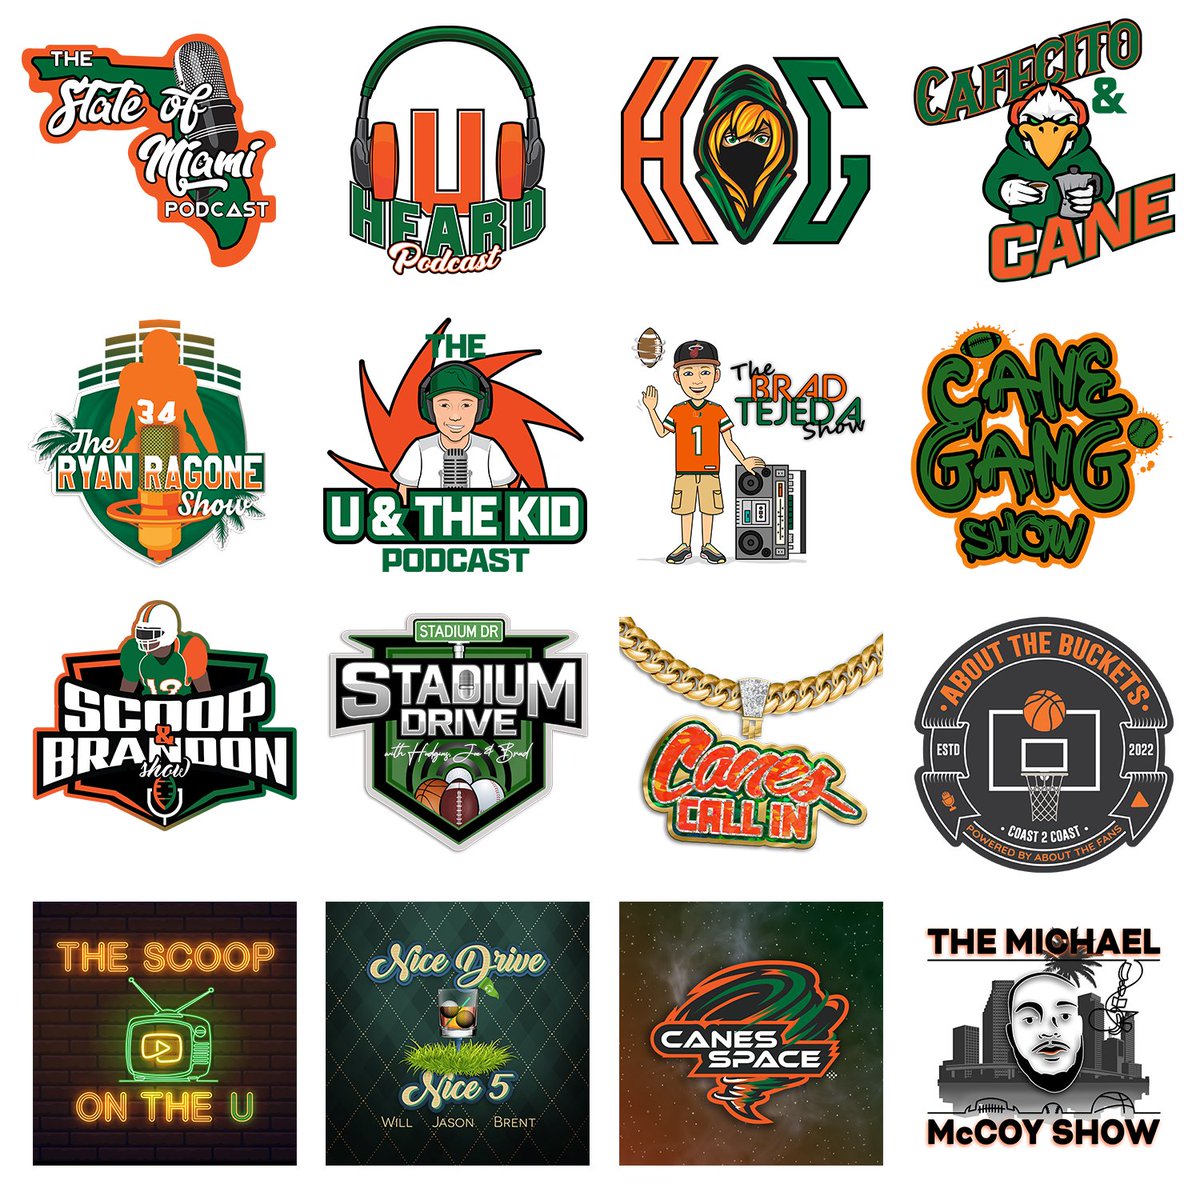 Our fingerprints are everywhere in this #Canes community!😍 This list keeps growing and we couldn't be prouder of the role we play(ed) in each of their journeys, no matter how small. Shoutout to everyone who trusted us with their brand, we appreciate you always! 🙏✊ #CanesFam…